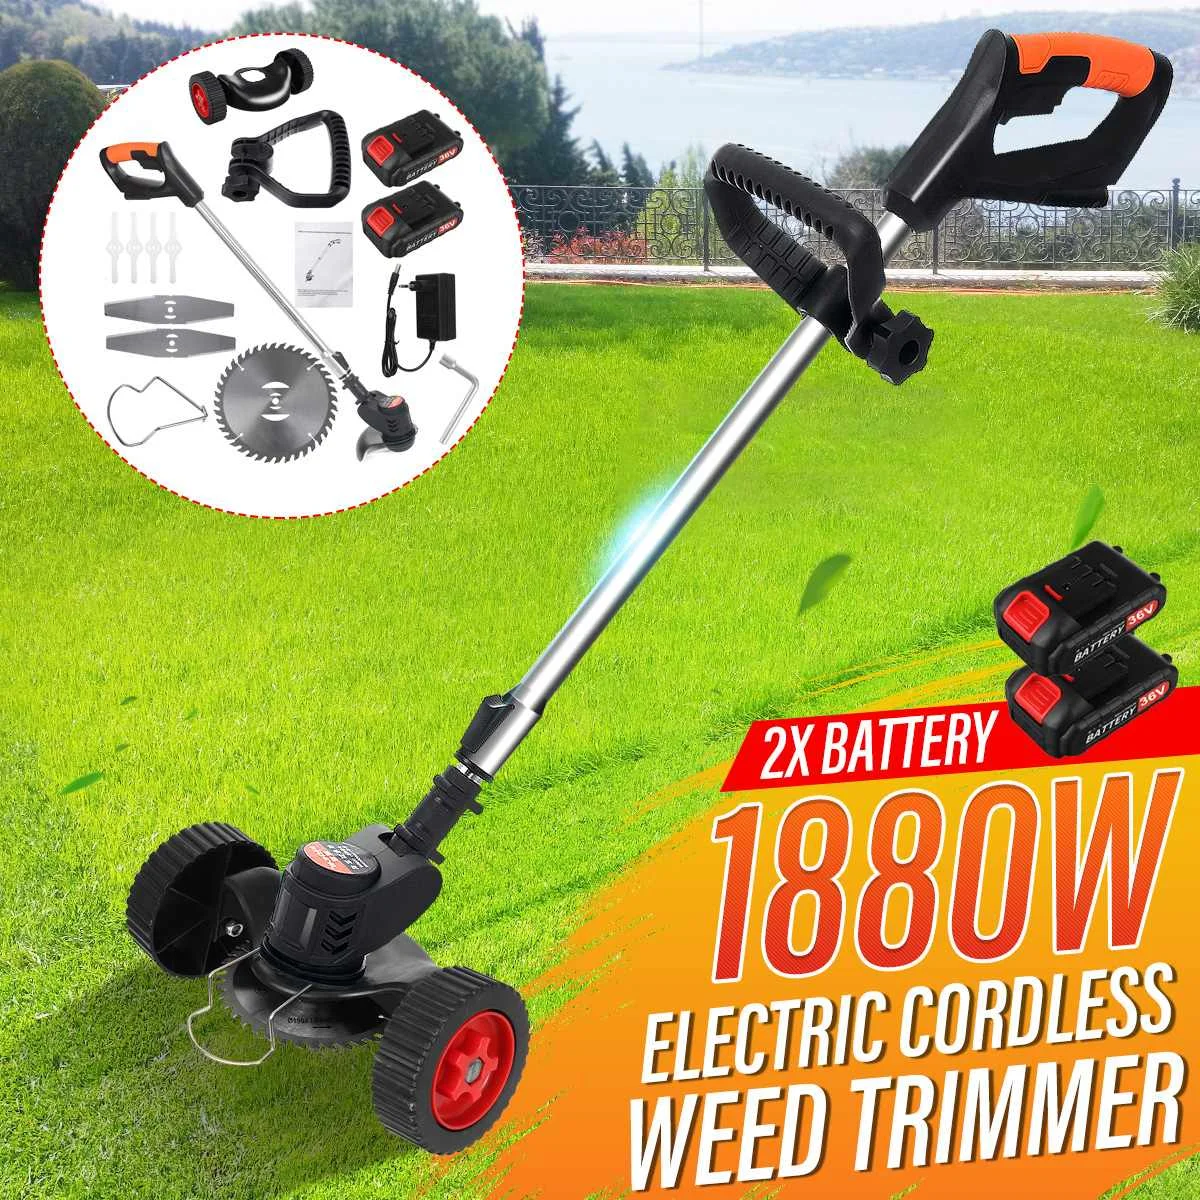 

1880W 36V Portable Electric Grass Trimmer Handheld Lawn Mower Hedge Brush Cutter Household Cordless Weeder Garden Pruning Tool